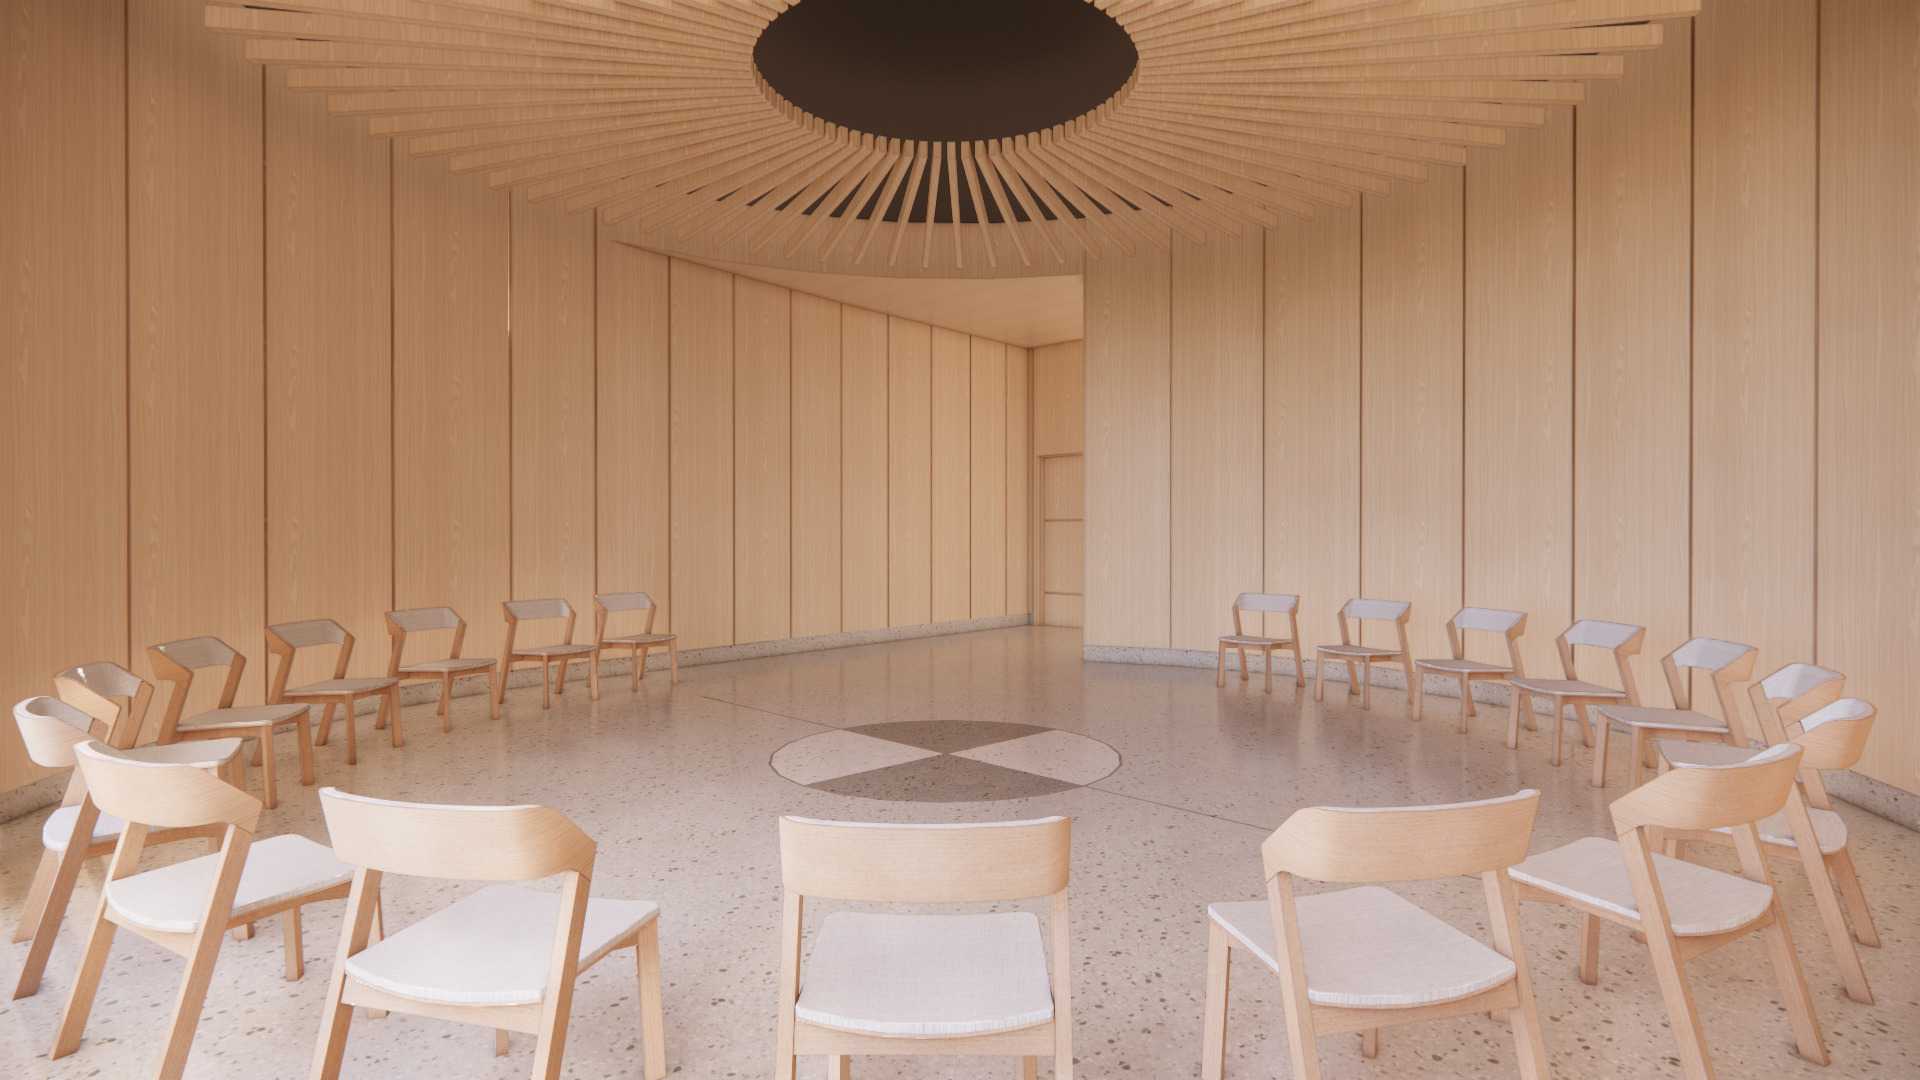 A round-shaped room with chairs set up in a circle